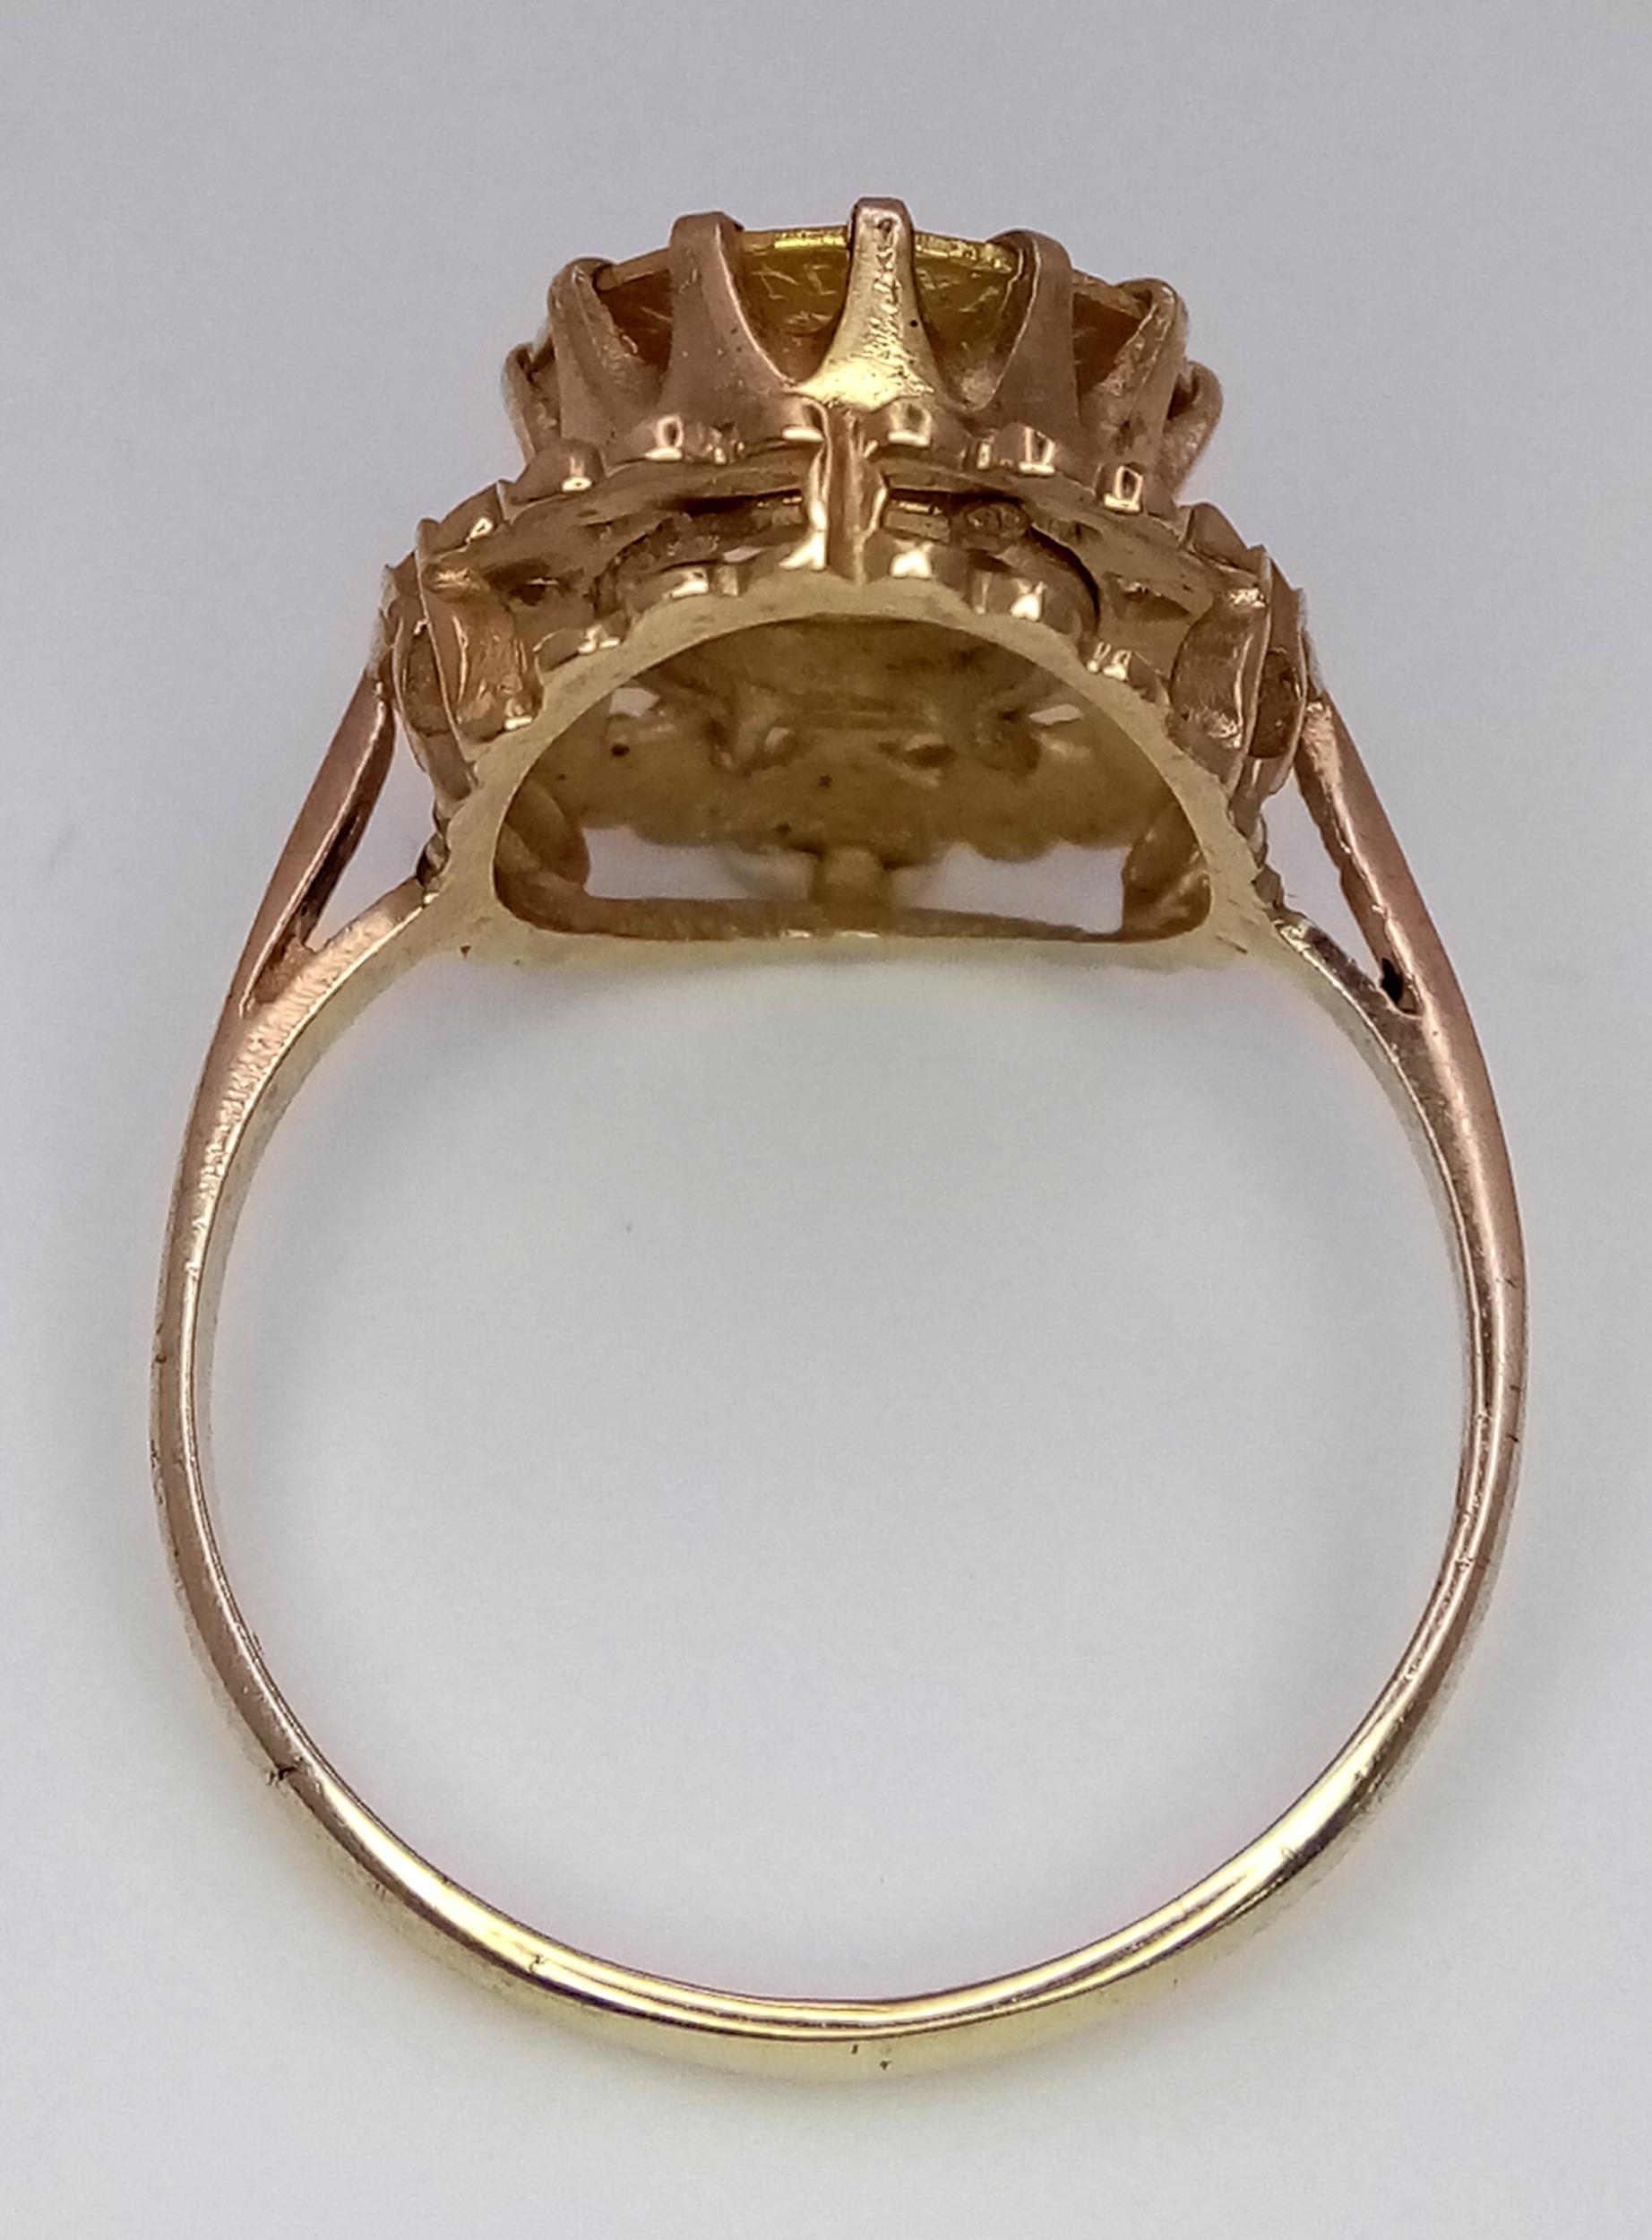 A 9 Carat Gold Tier Mounted Mexican/Columbian Gold Coin Set Ring Size P. Lower Crown Tier Measures - Image 4 of 5